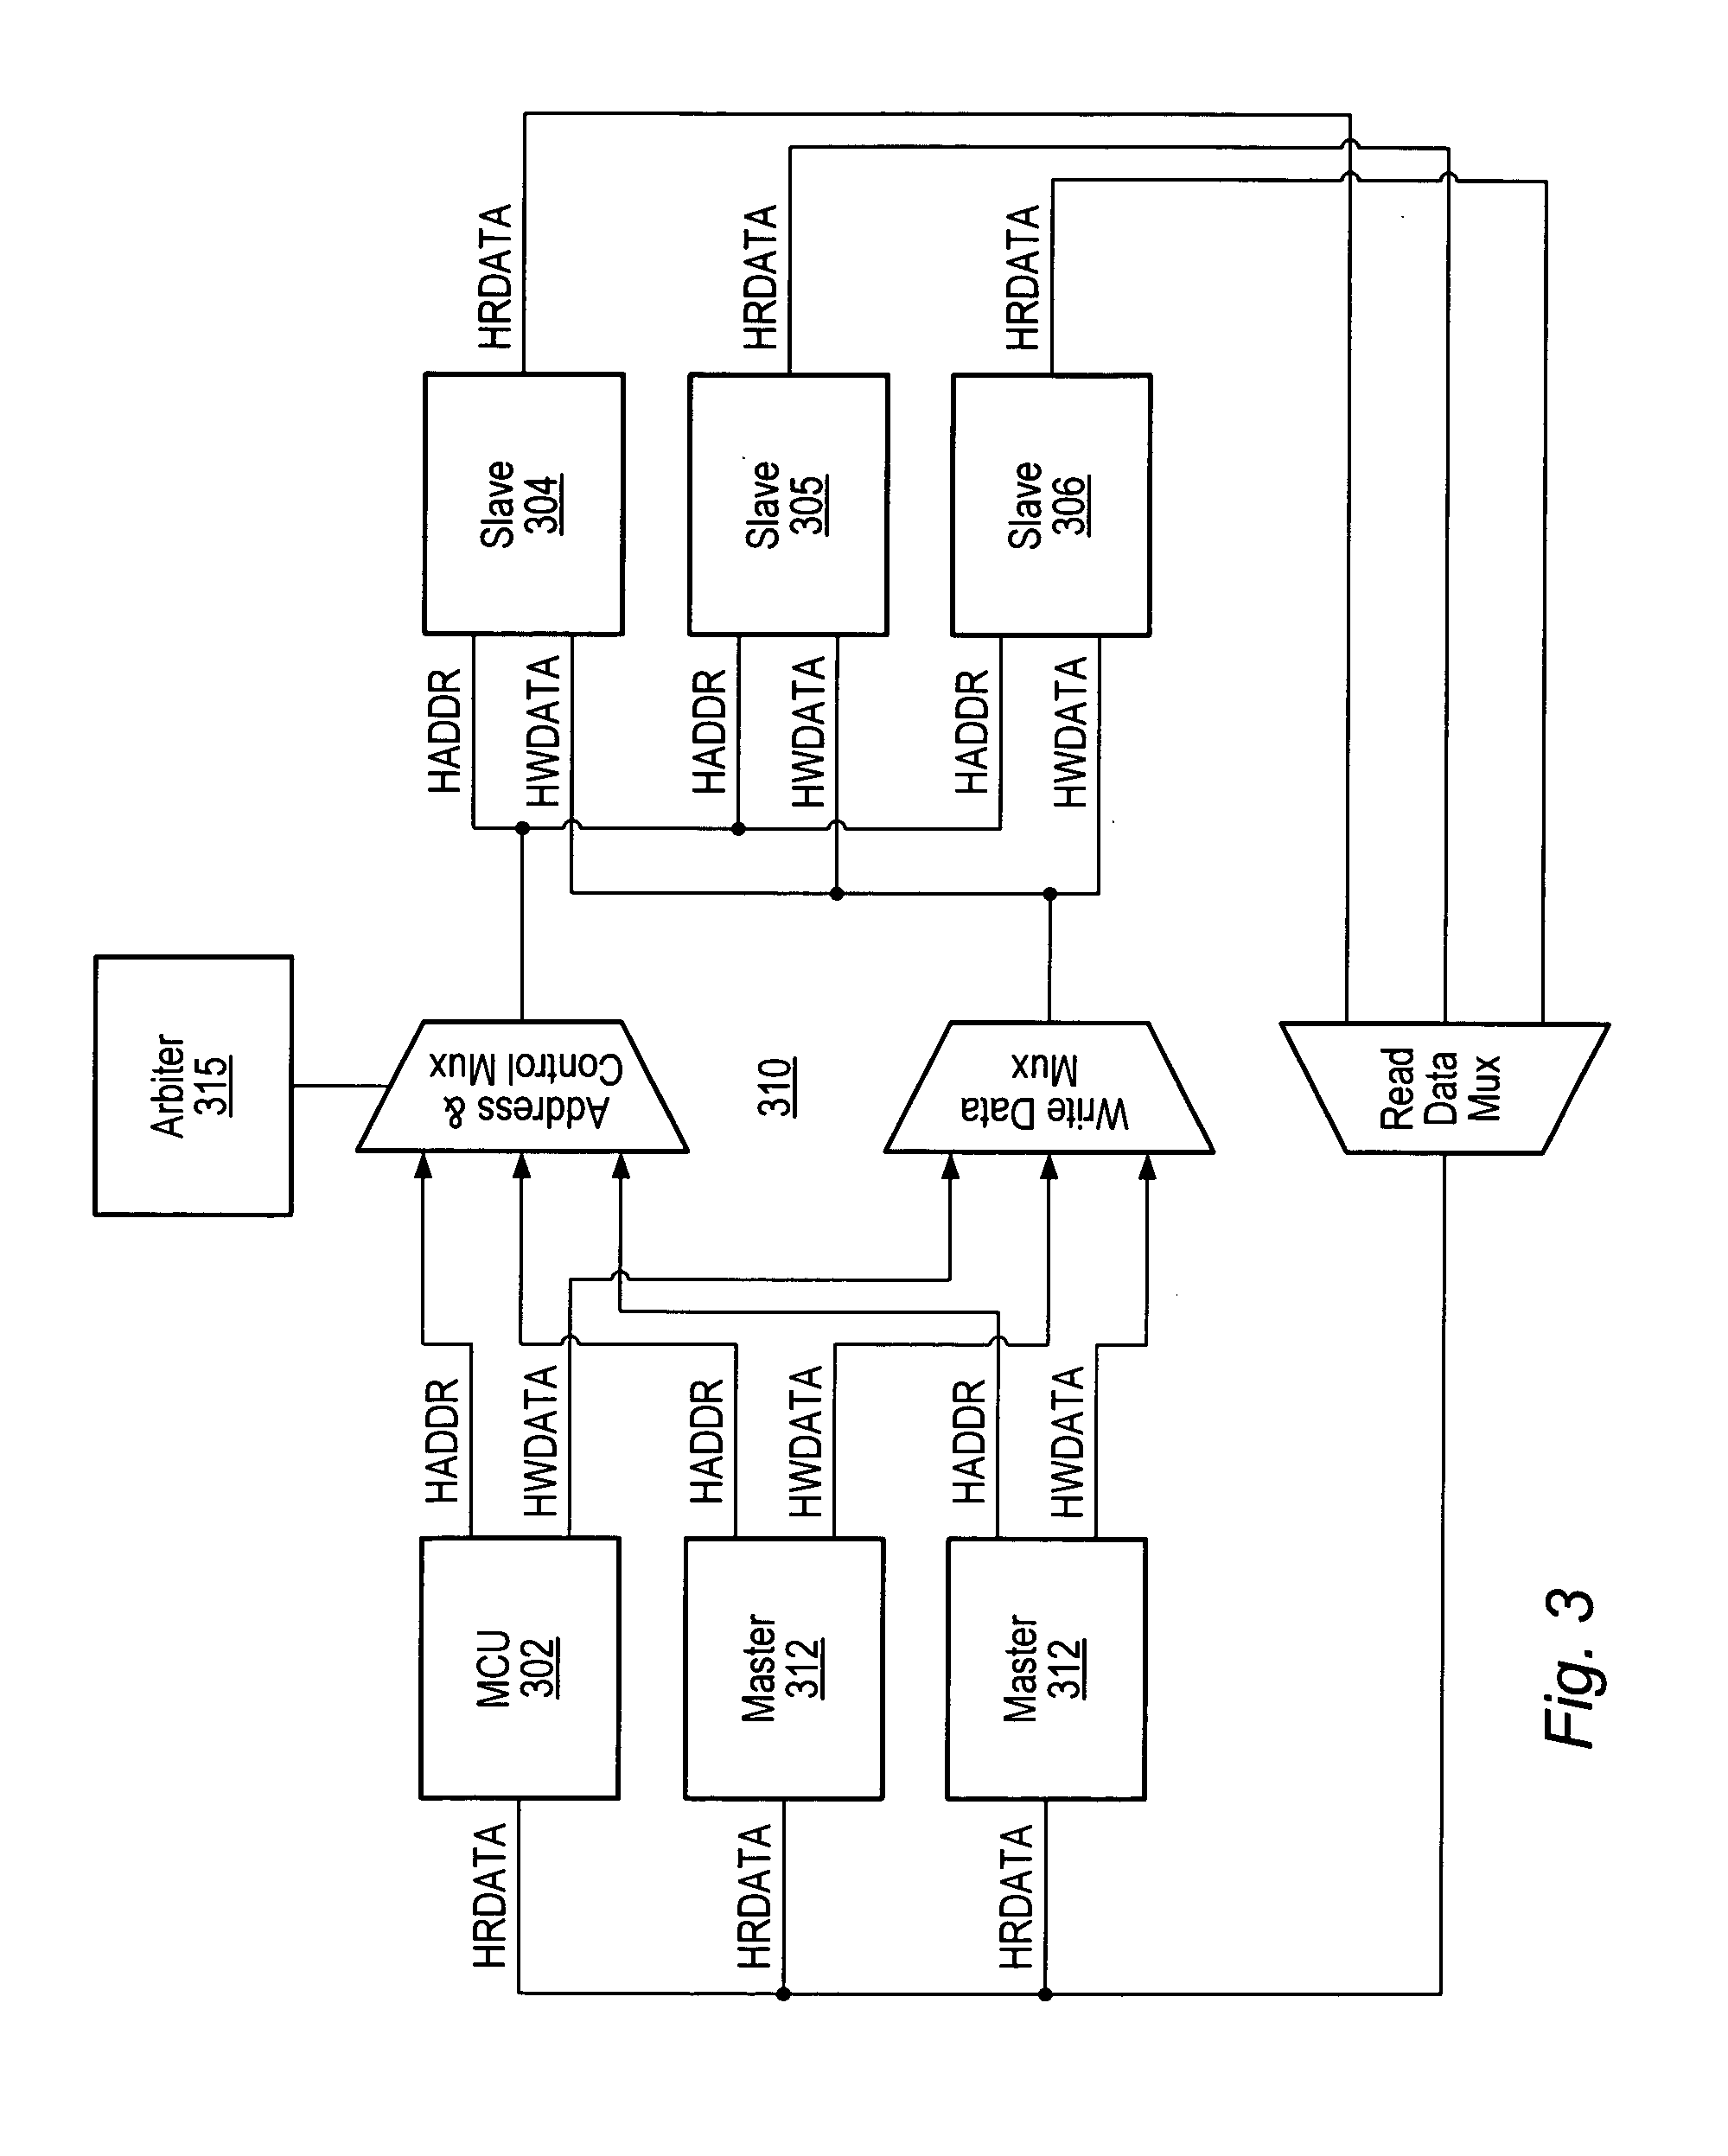 Communication apparatus implementing time domain isolation with restricted bus access